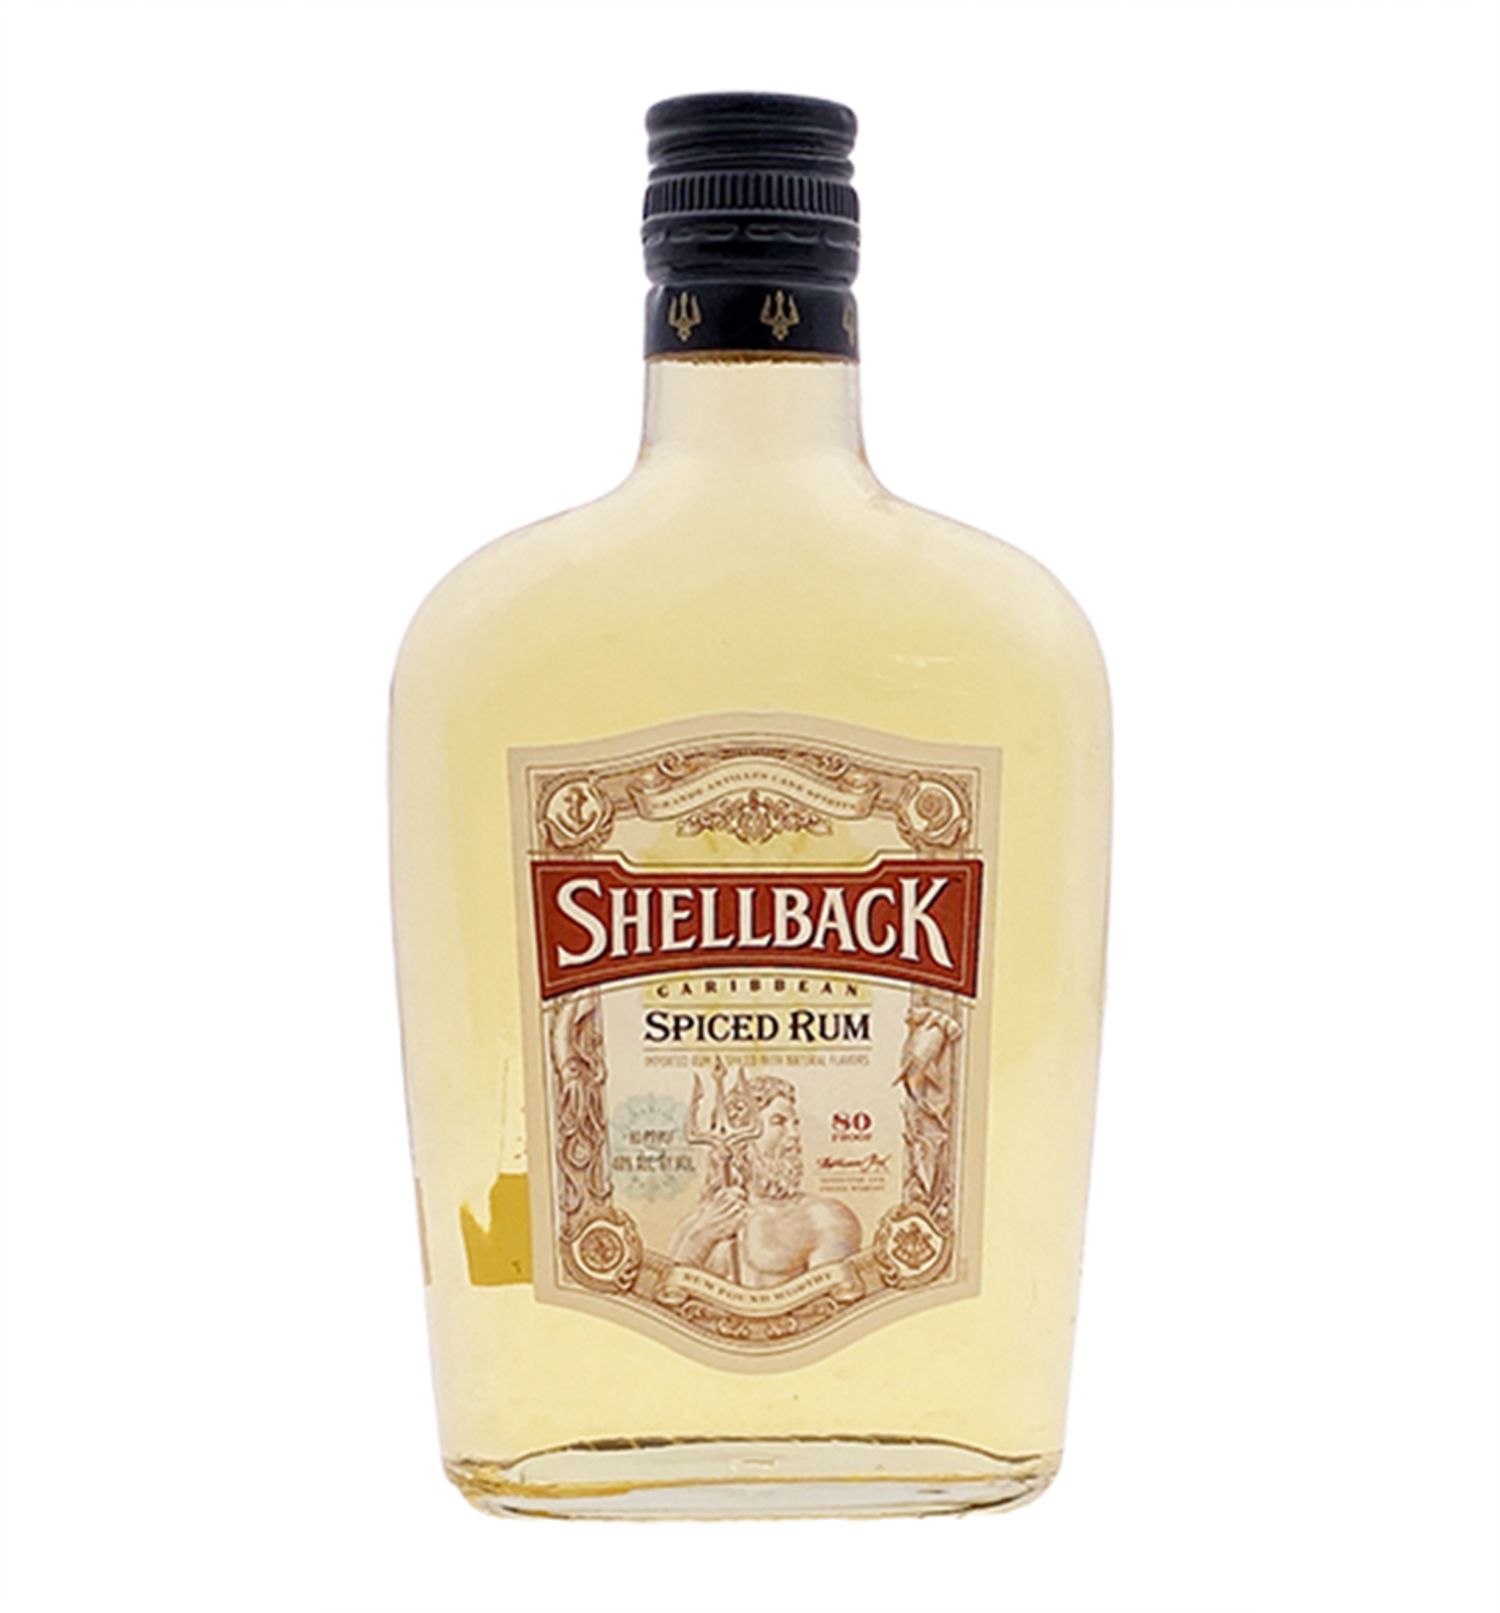 Shellback, Caribbean Spiced Rum 375ml $12 FREE DELIVERY - Uncle Fossil  Wine&Spirits